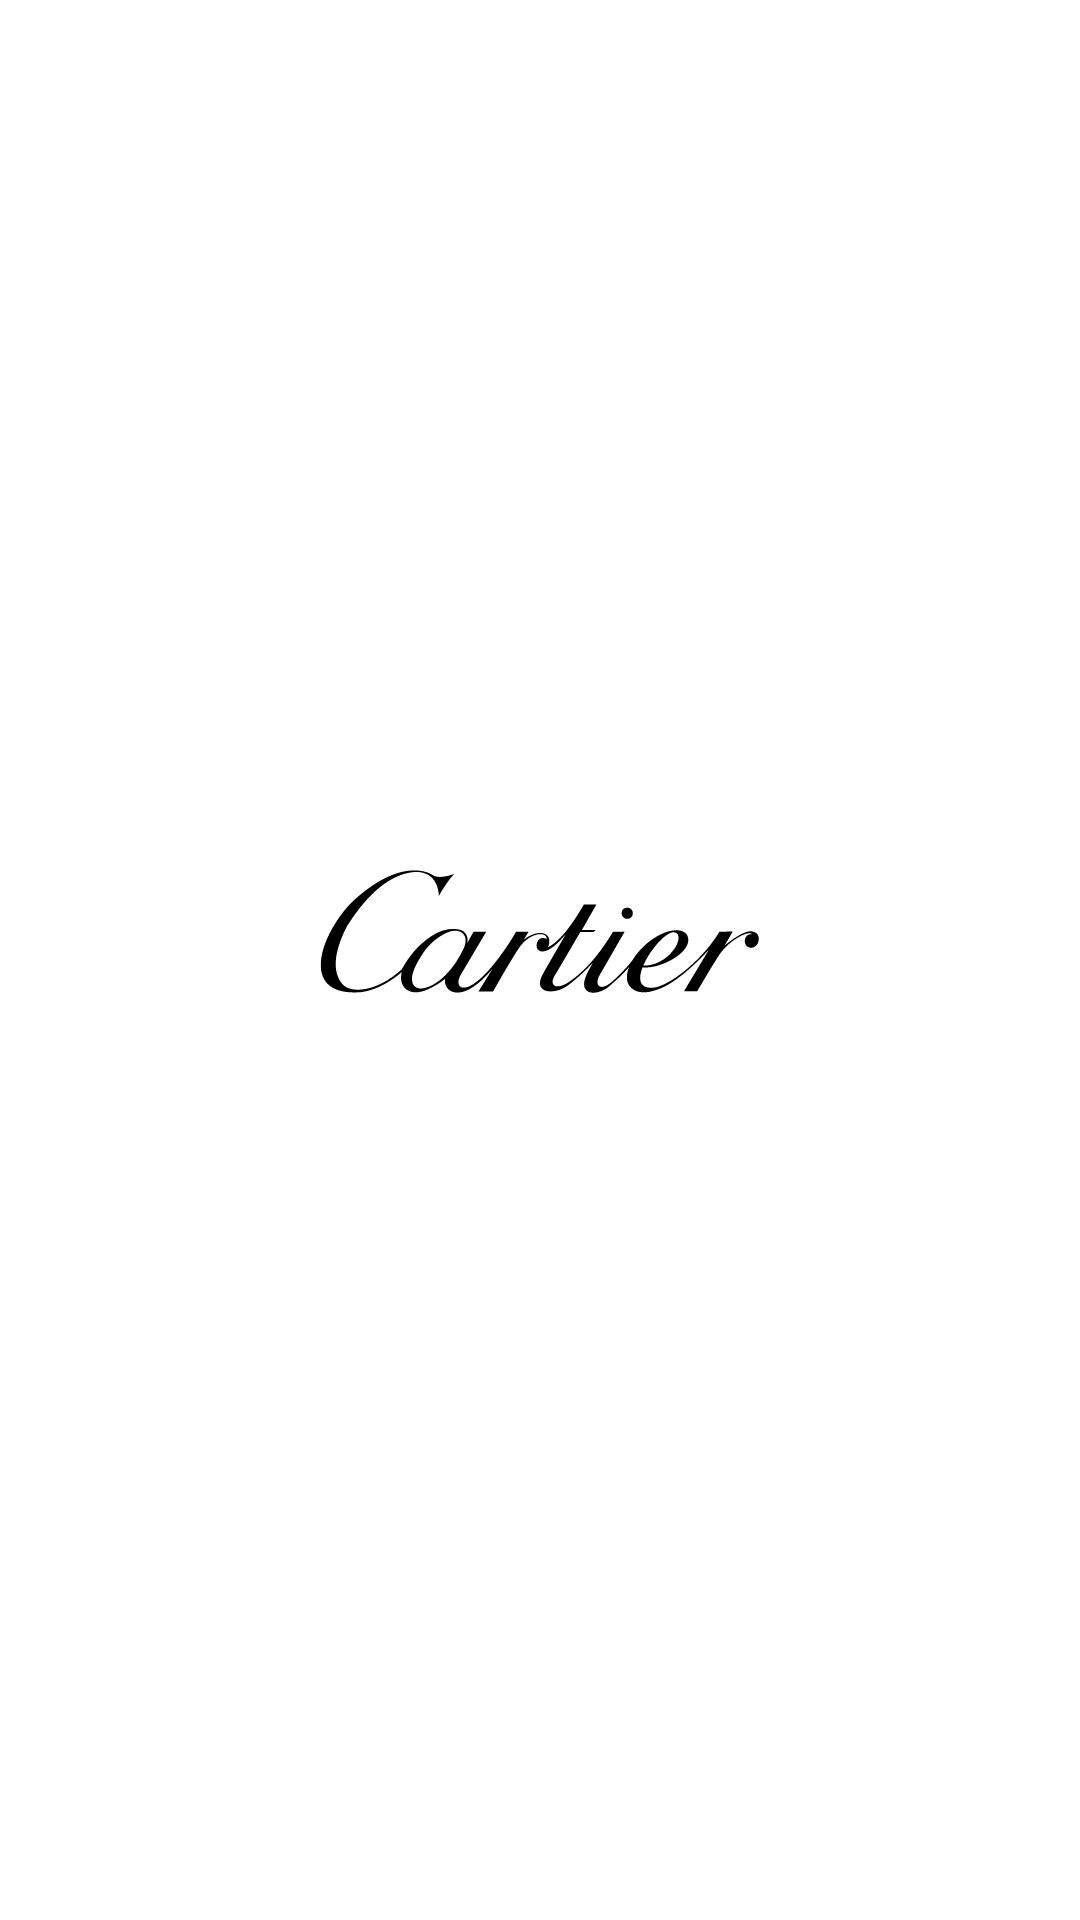 Cartier: One of the world's most esteemed luxury brands, which designs timeless watches. 1080x1920 Full HD Wallpaper.